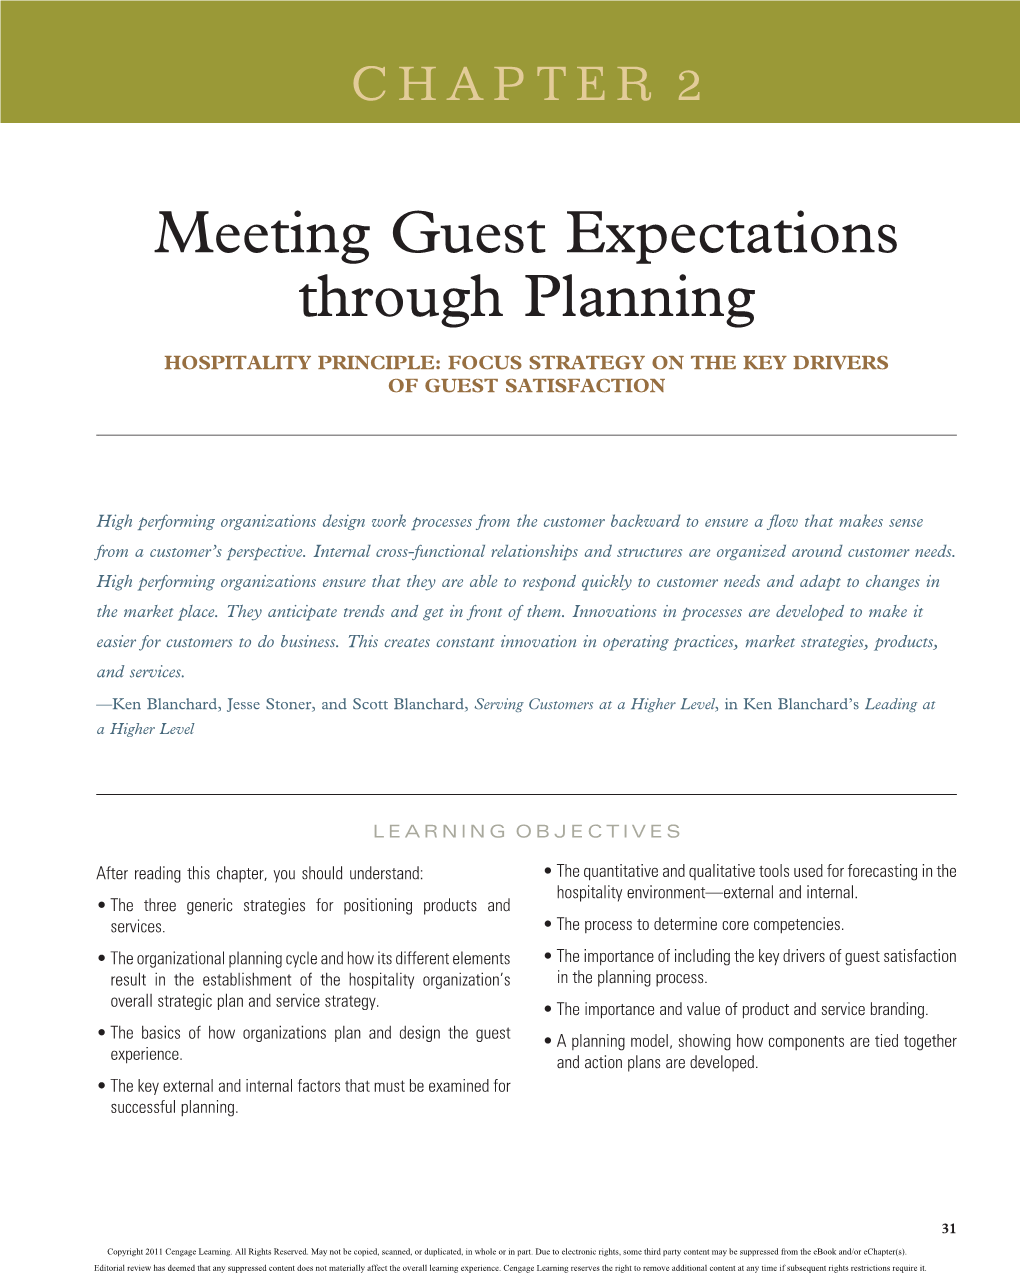 Meeting Guest Expectations Through Planning